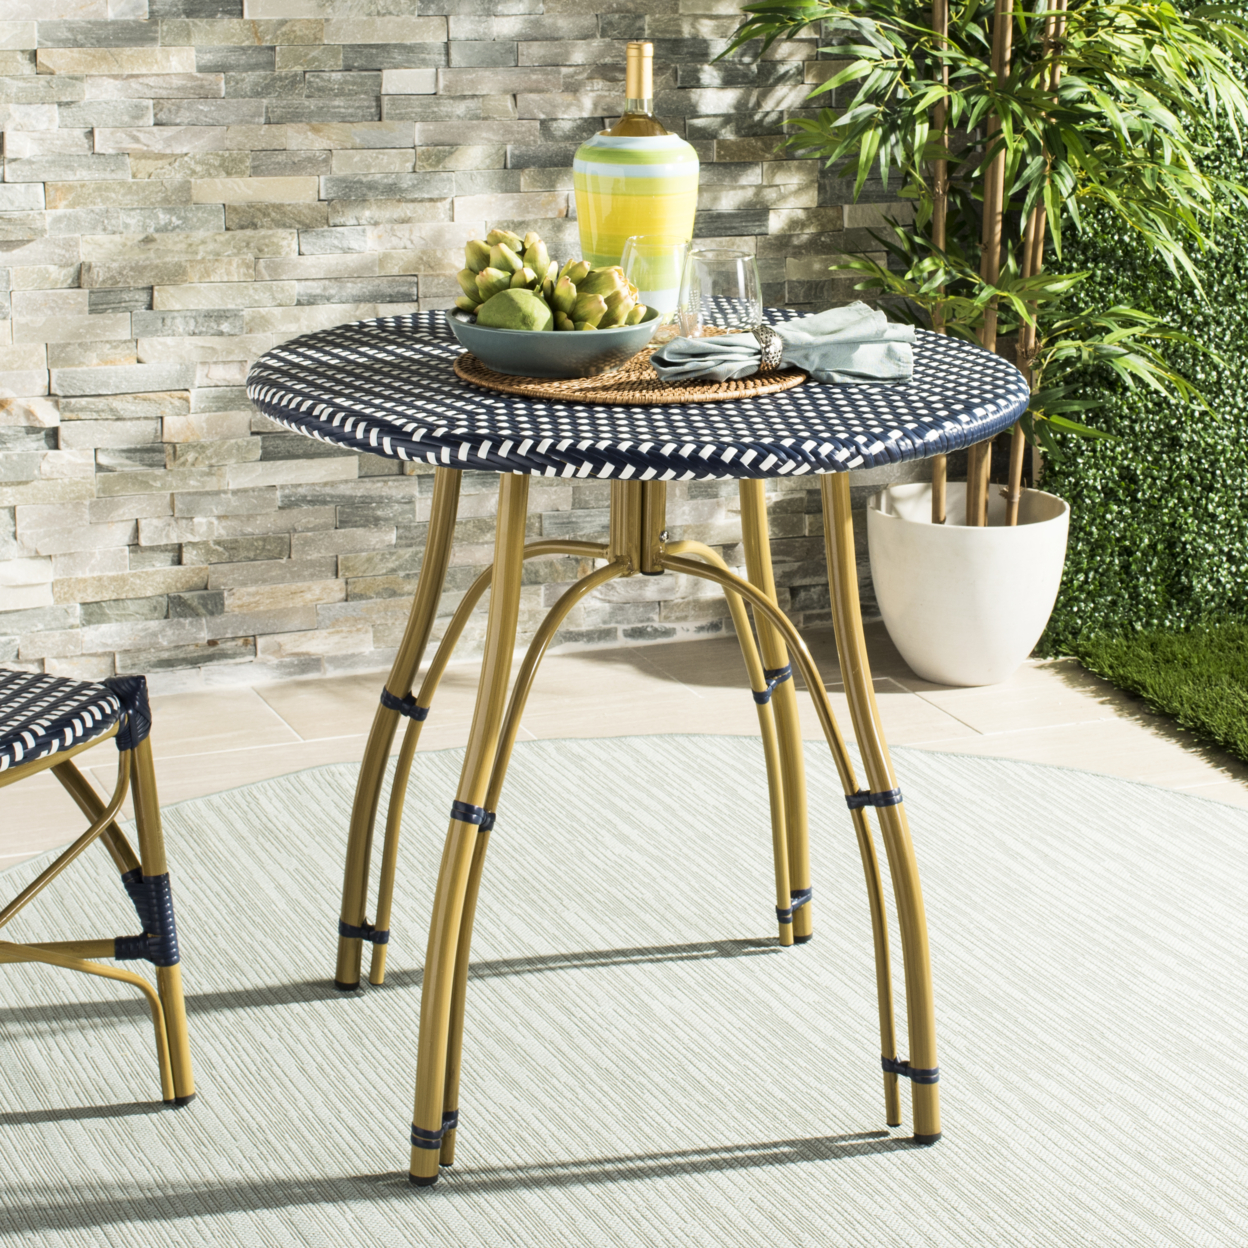 SAFAVIEH Outdoor Collection Kylie Rattan Bistro Table Navy/White